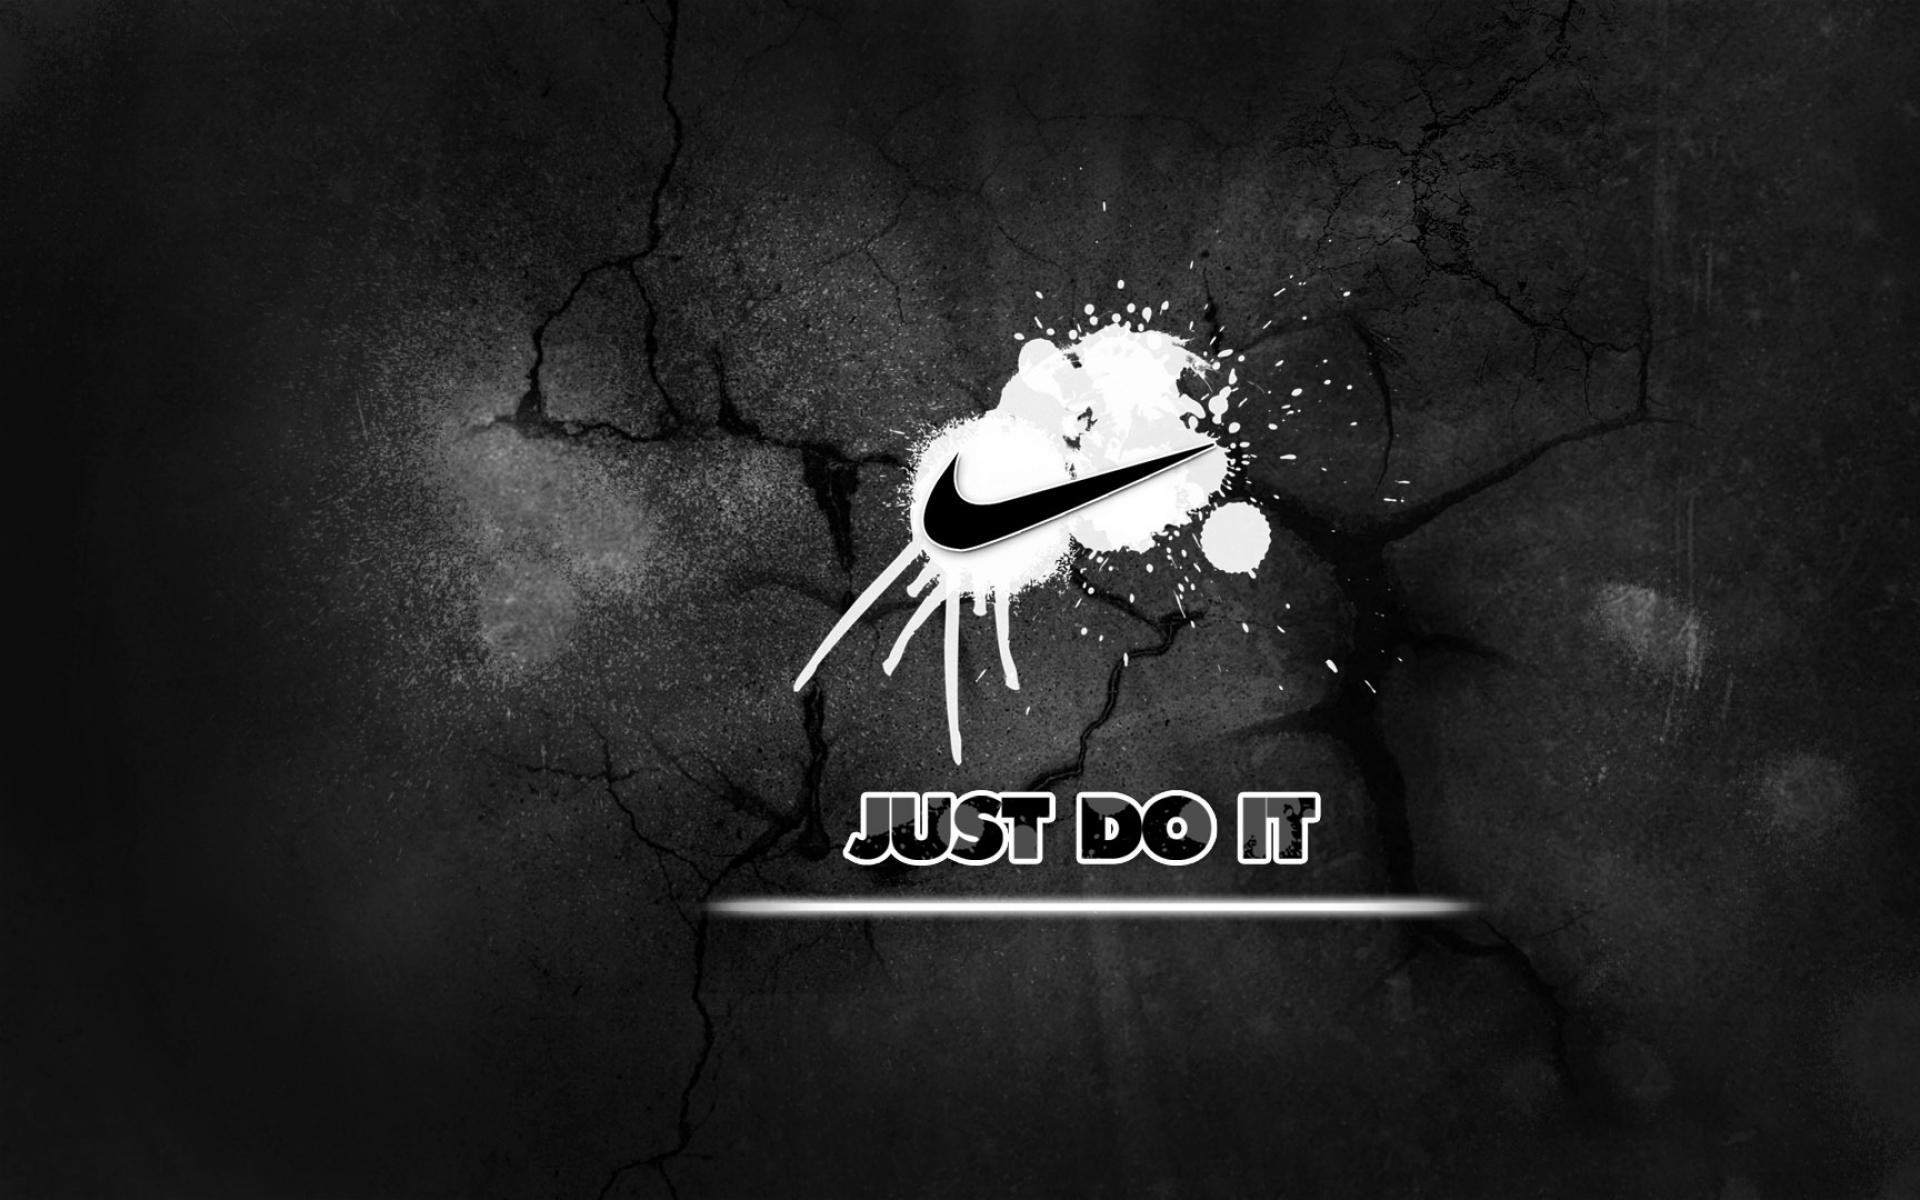 Download Just Do It Wallpaper Hd Hd Backgrounds Download Itl Cat